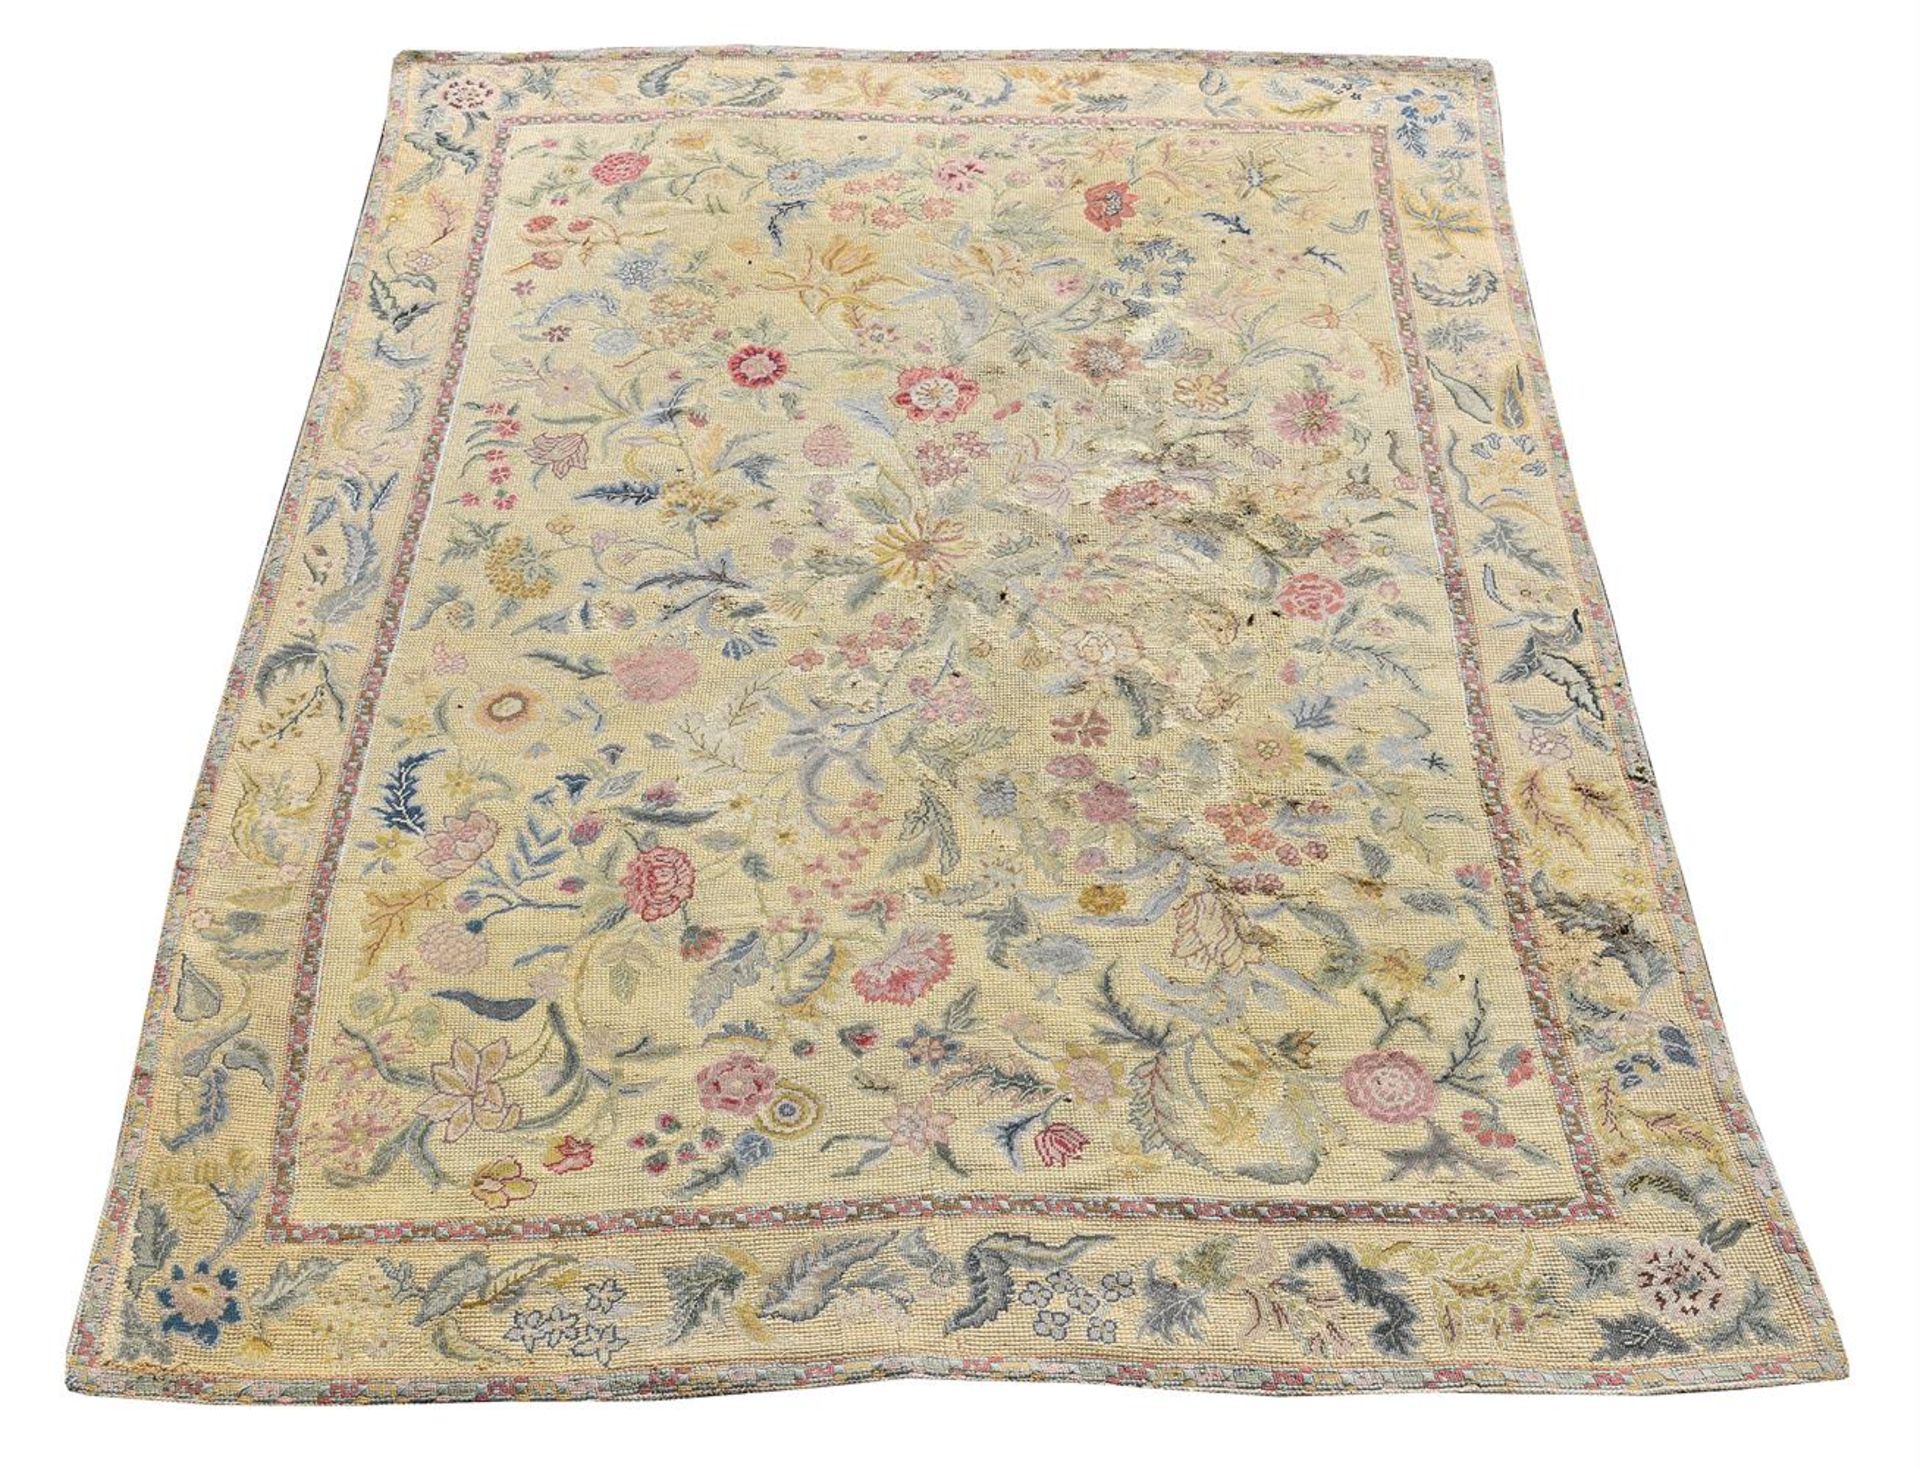 A NEEDLEWORK CARPET, ATTRIBUTABLE TO THE WORKSHOP OF PONTREMOLI, EARLY 20TH CENTURY